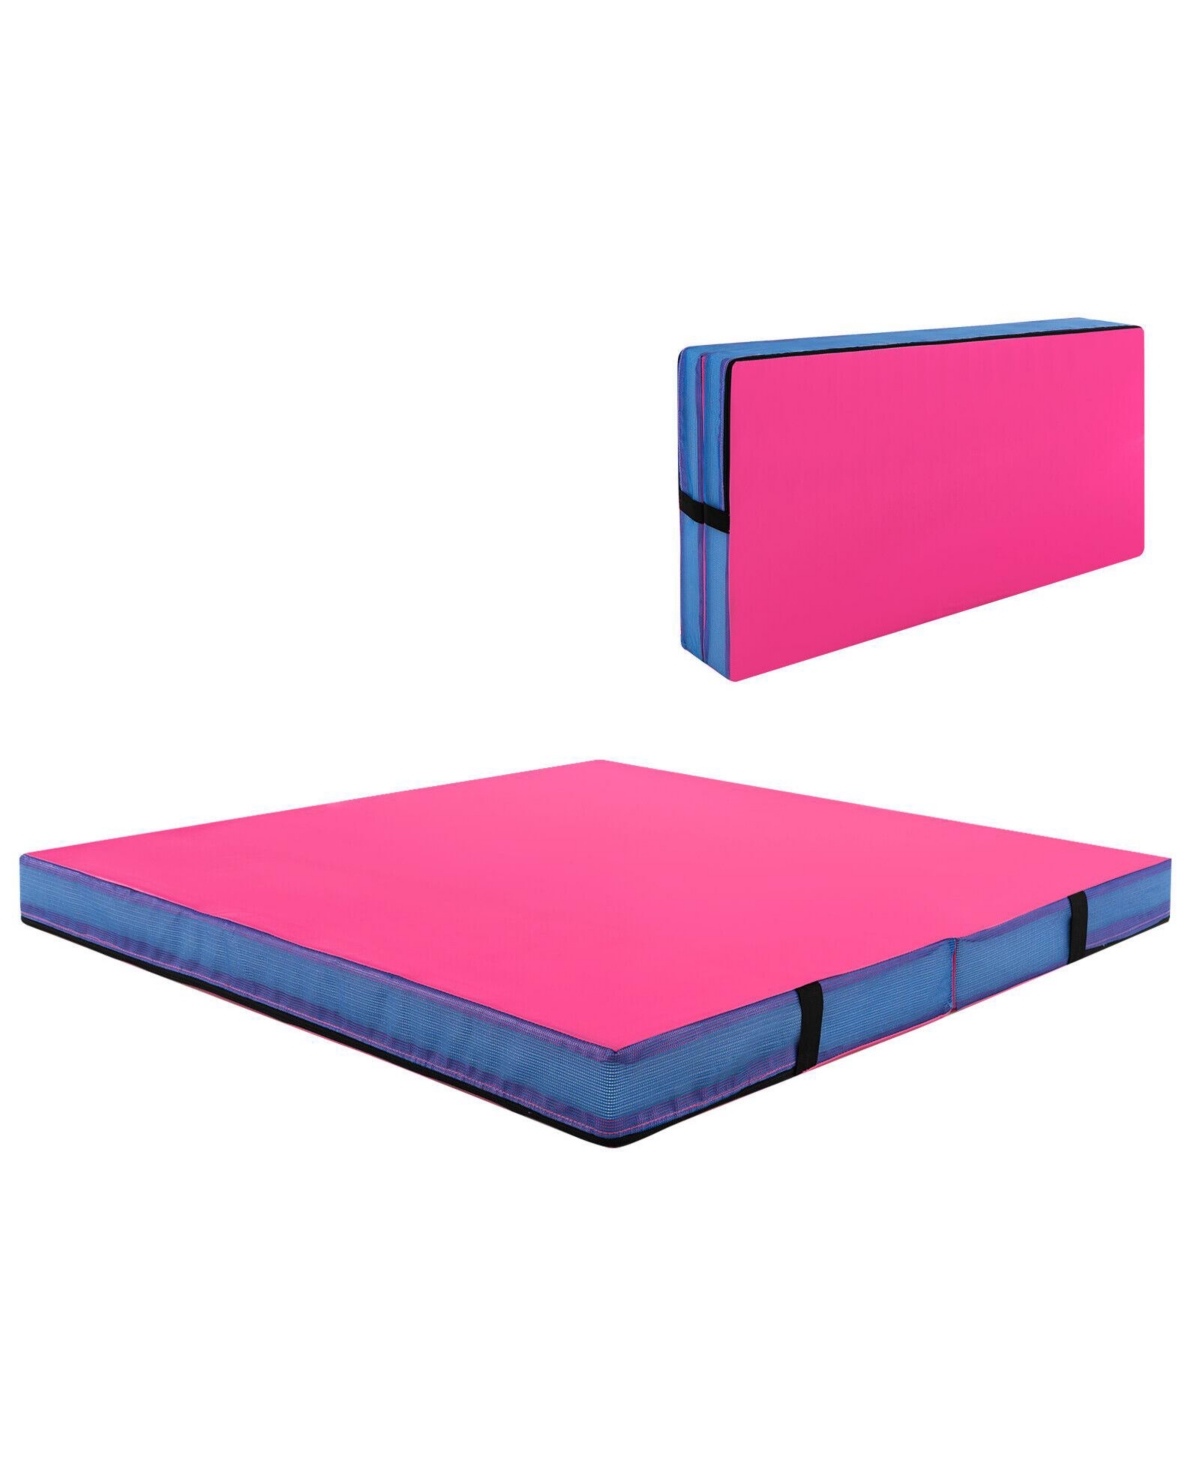 4ft x 4ft x 4in Bi-Folding Gymnastic Tumbling Mat with Handles and Cover - Purple